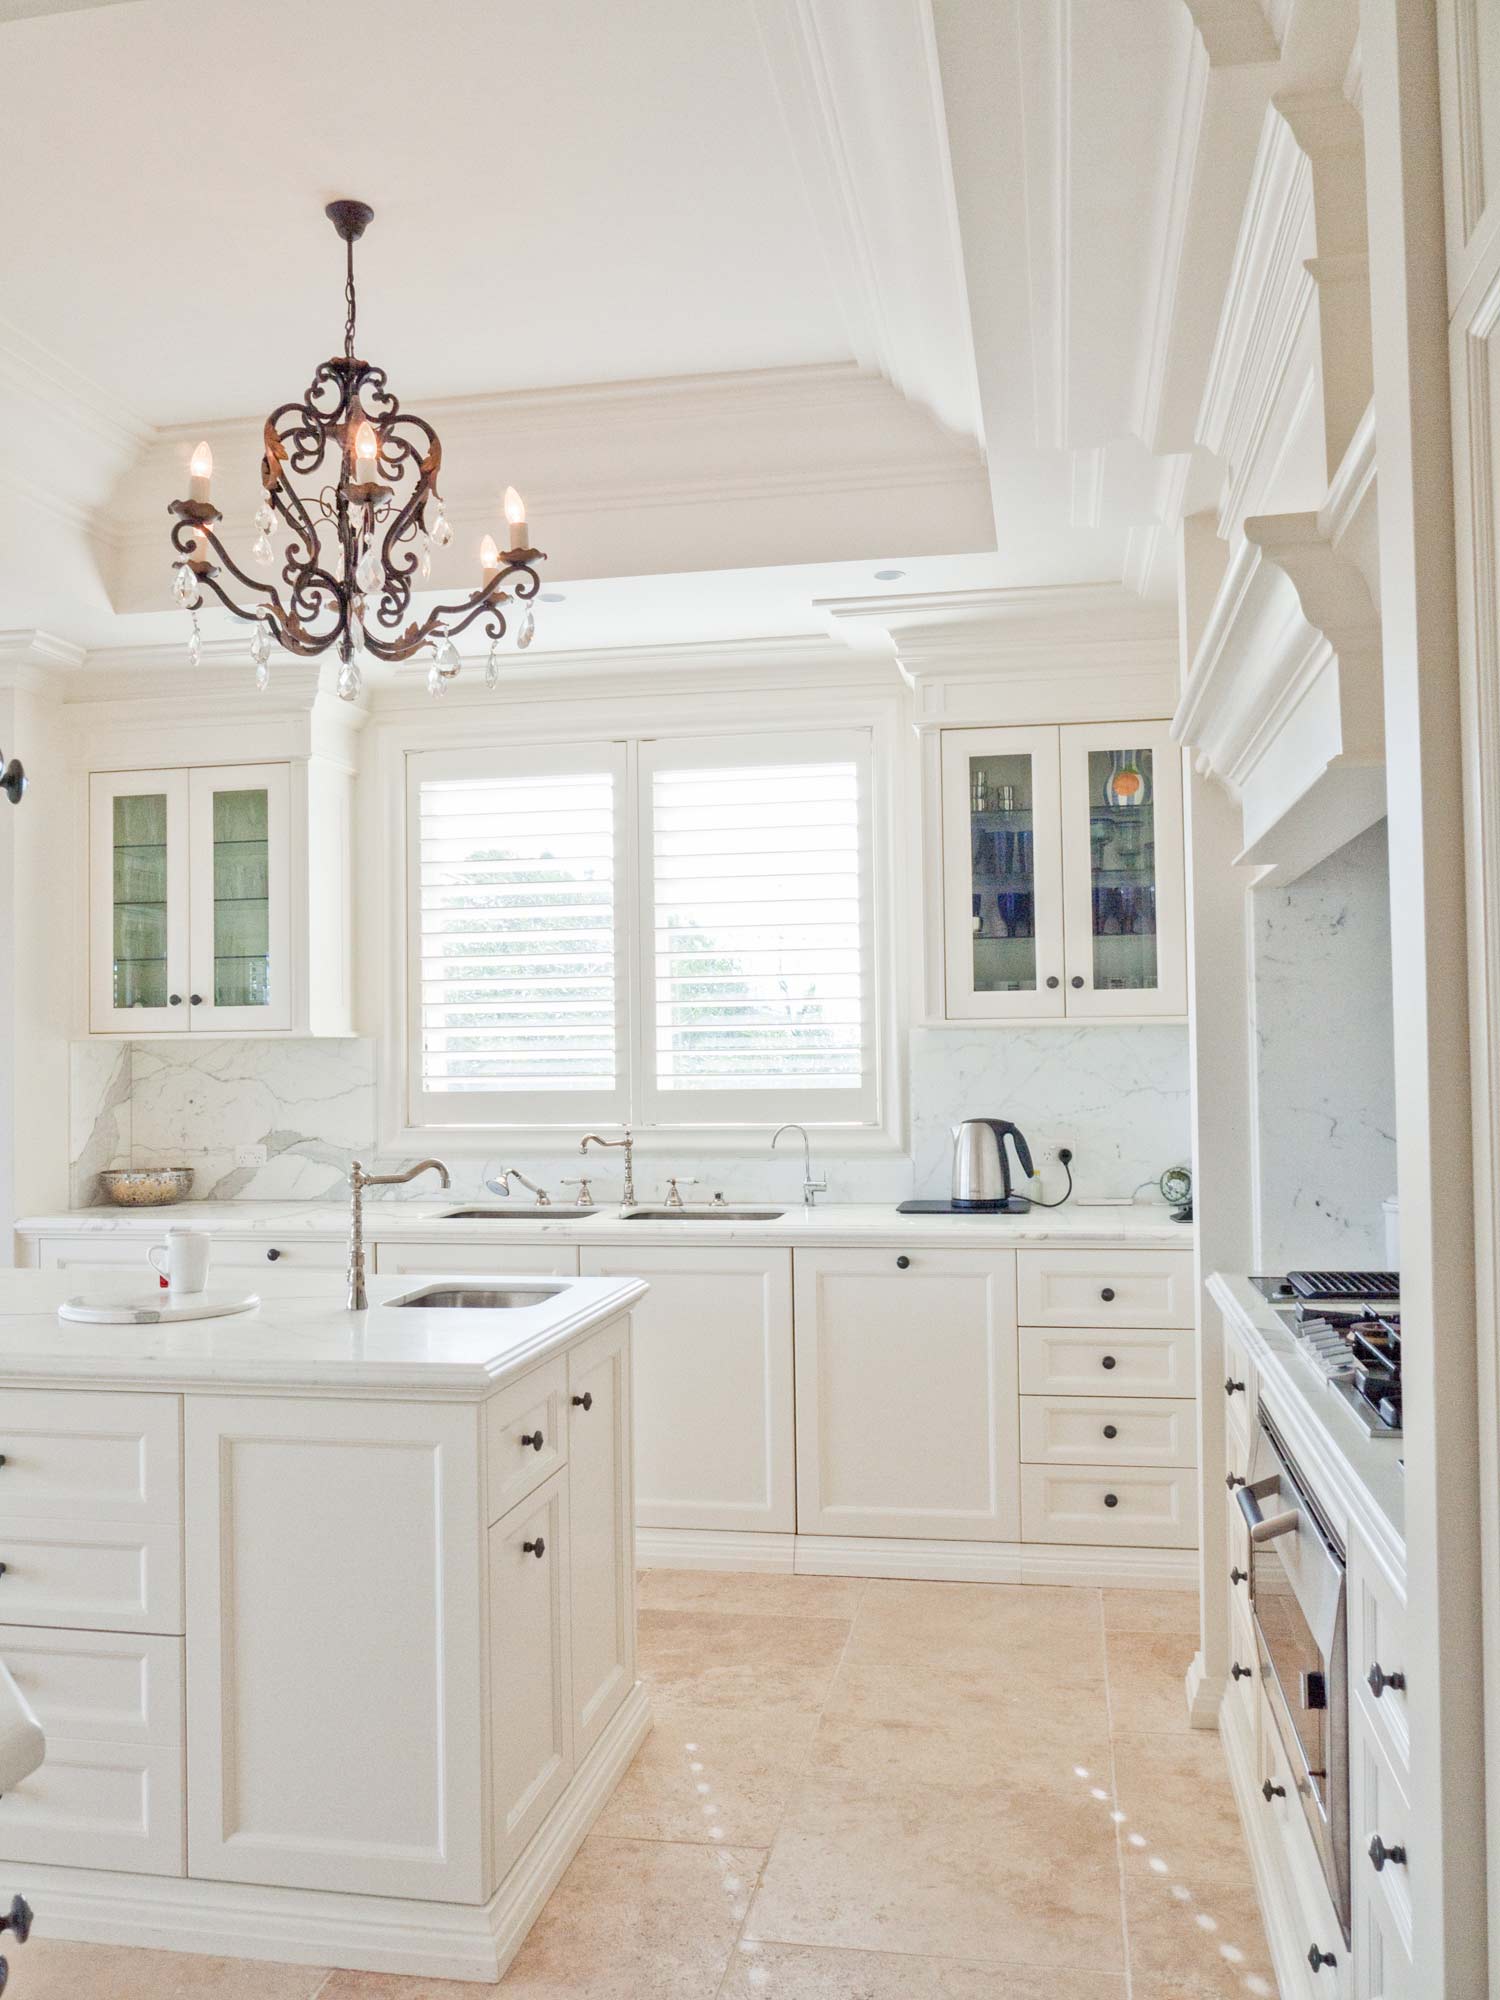 2 French kitchen with marble floor, french hardware and wrought iron light